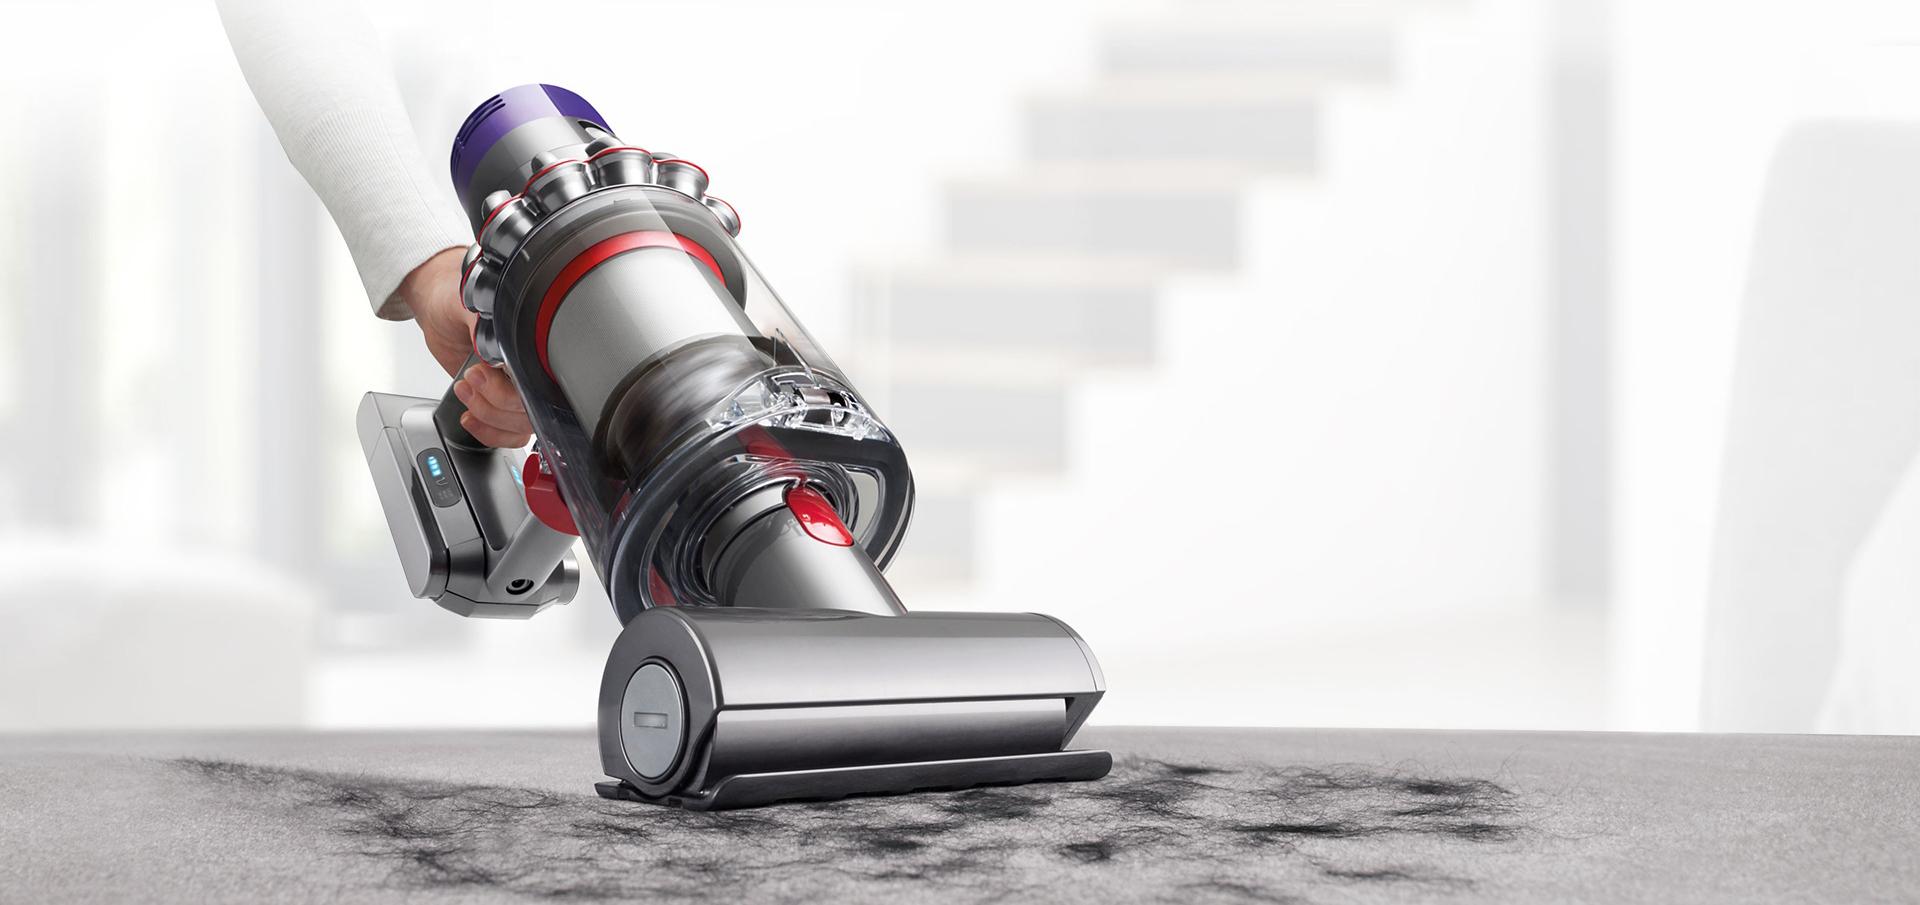 Dyson Cyclone V10™ vacuum in handheld mode cleaning upholstery